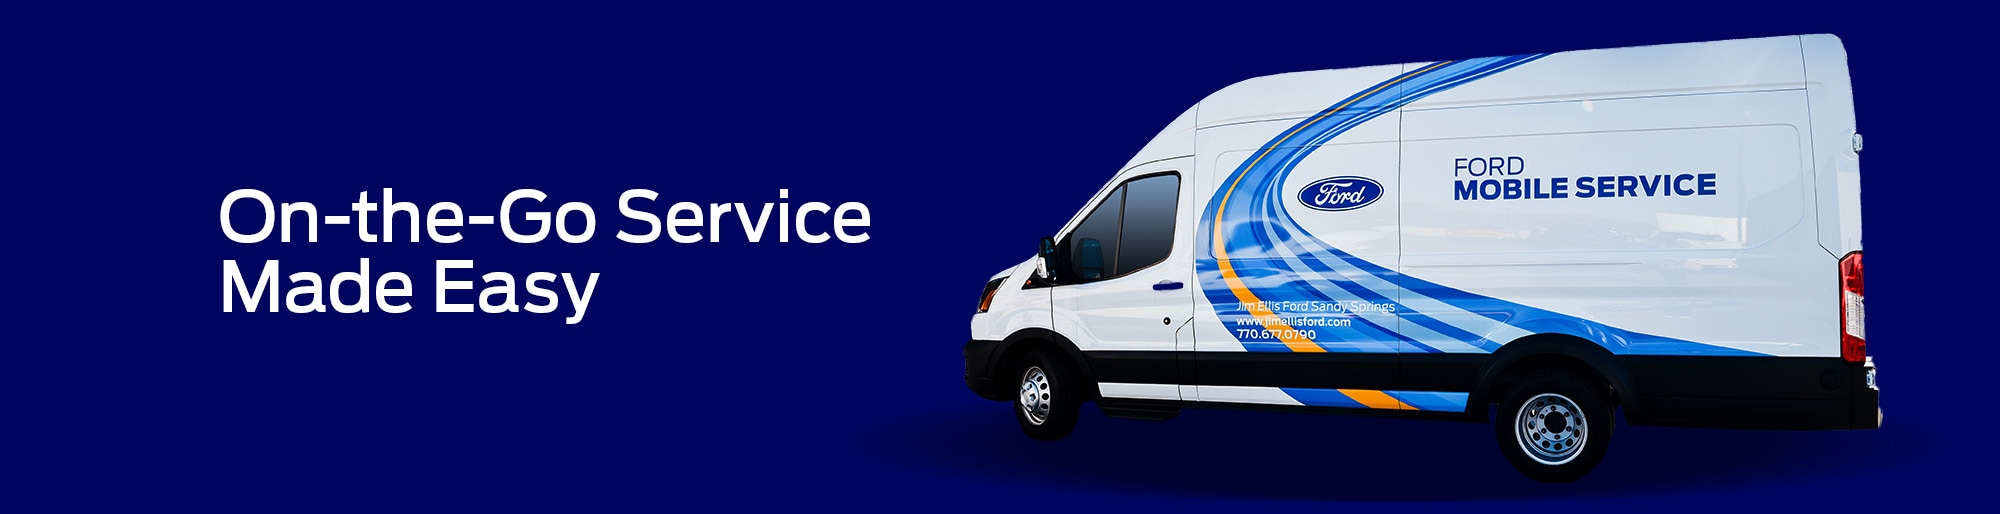 ford mobile service